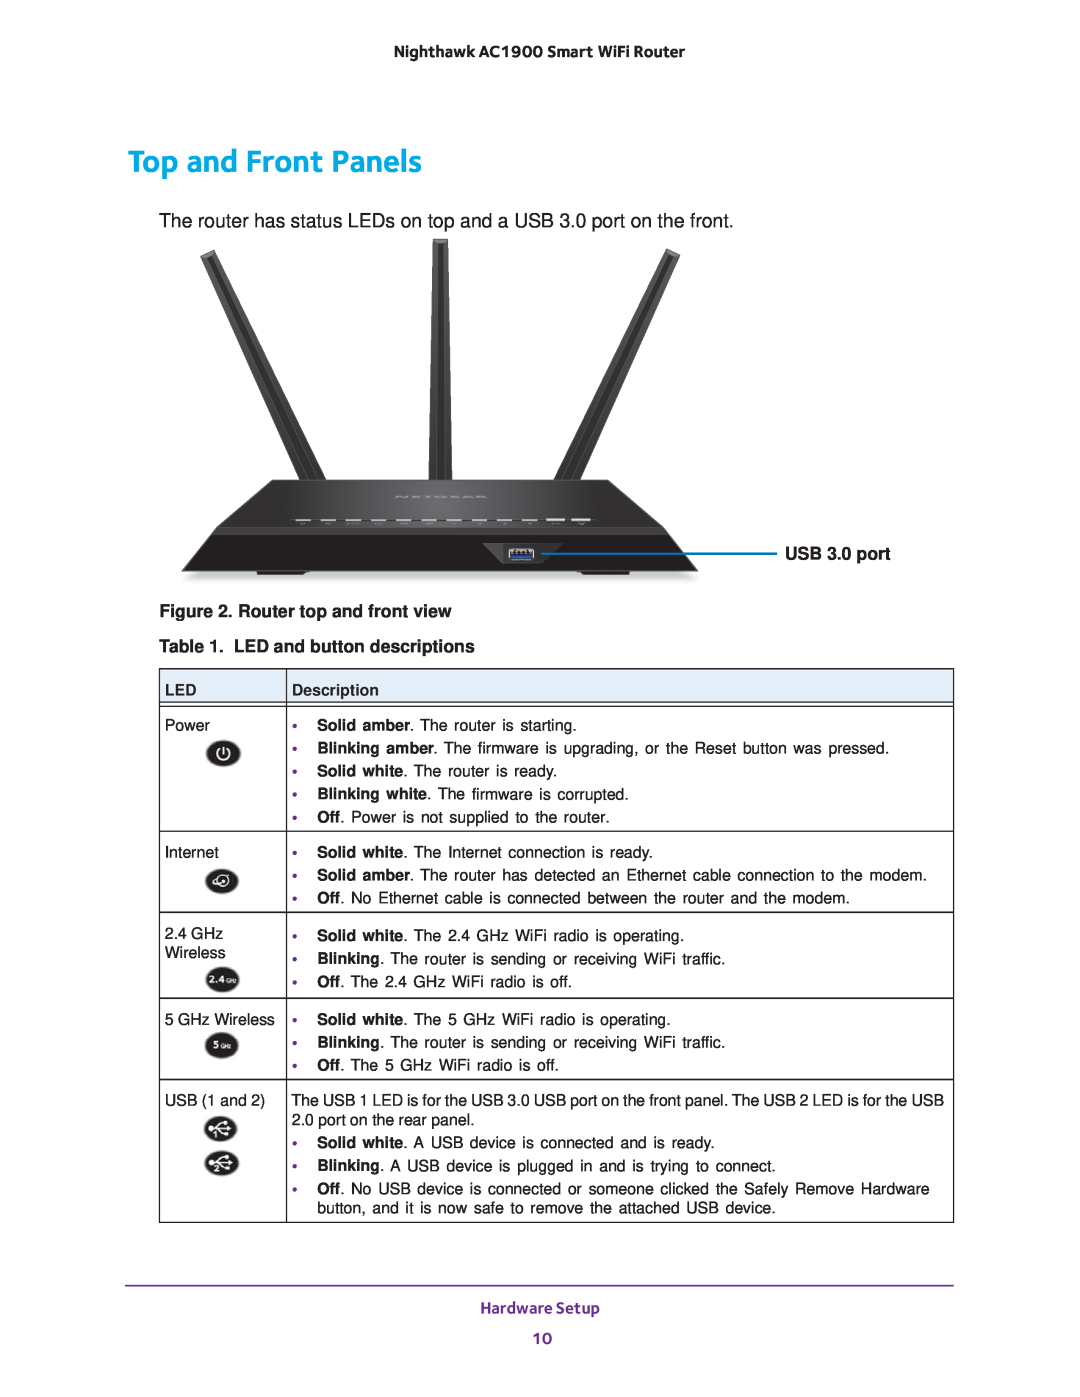 NETGEAR Model R7000 Top and Front Panels, Nighthawk AC1900 Smart WiFi Router, USB 3.0 port . Router top and front view 